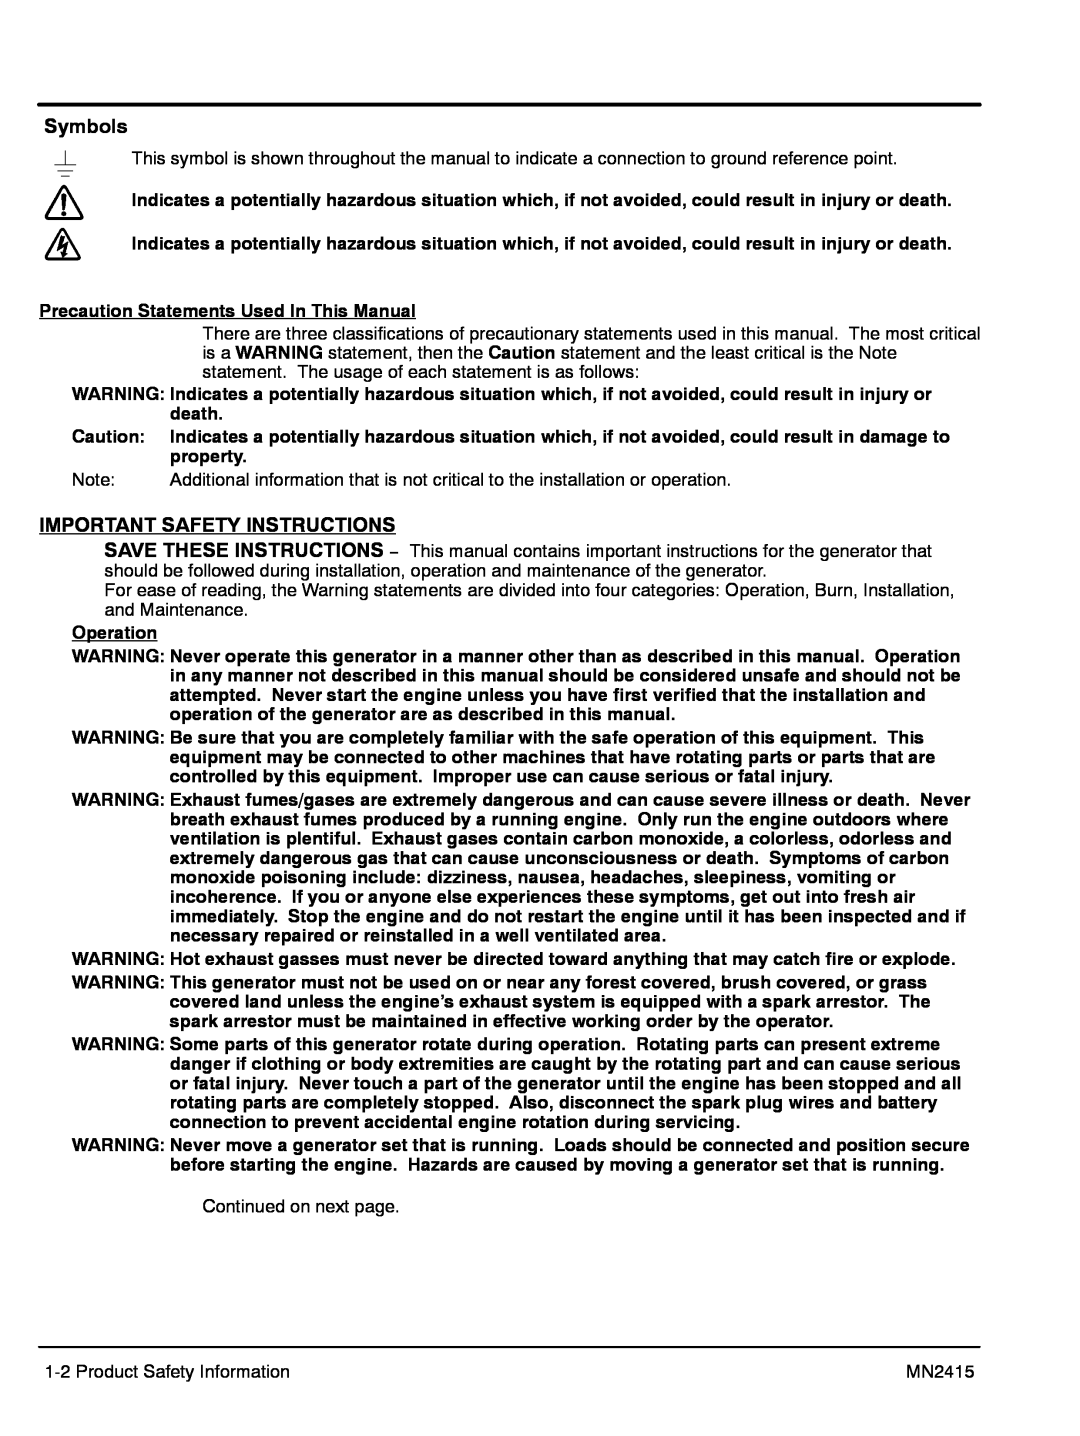 Baldor AE25, AE11, AE10, AE8 Symbols, Important Safety Instructions, Precaution Statements Used In This Manual, Operation 